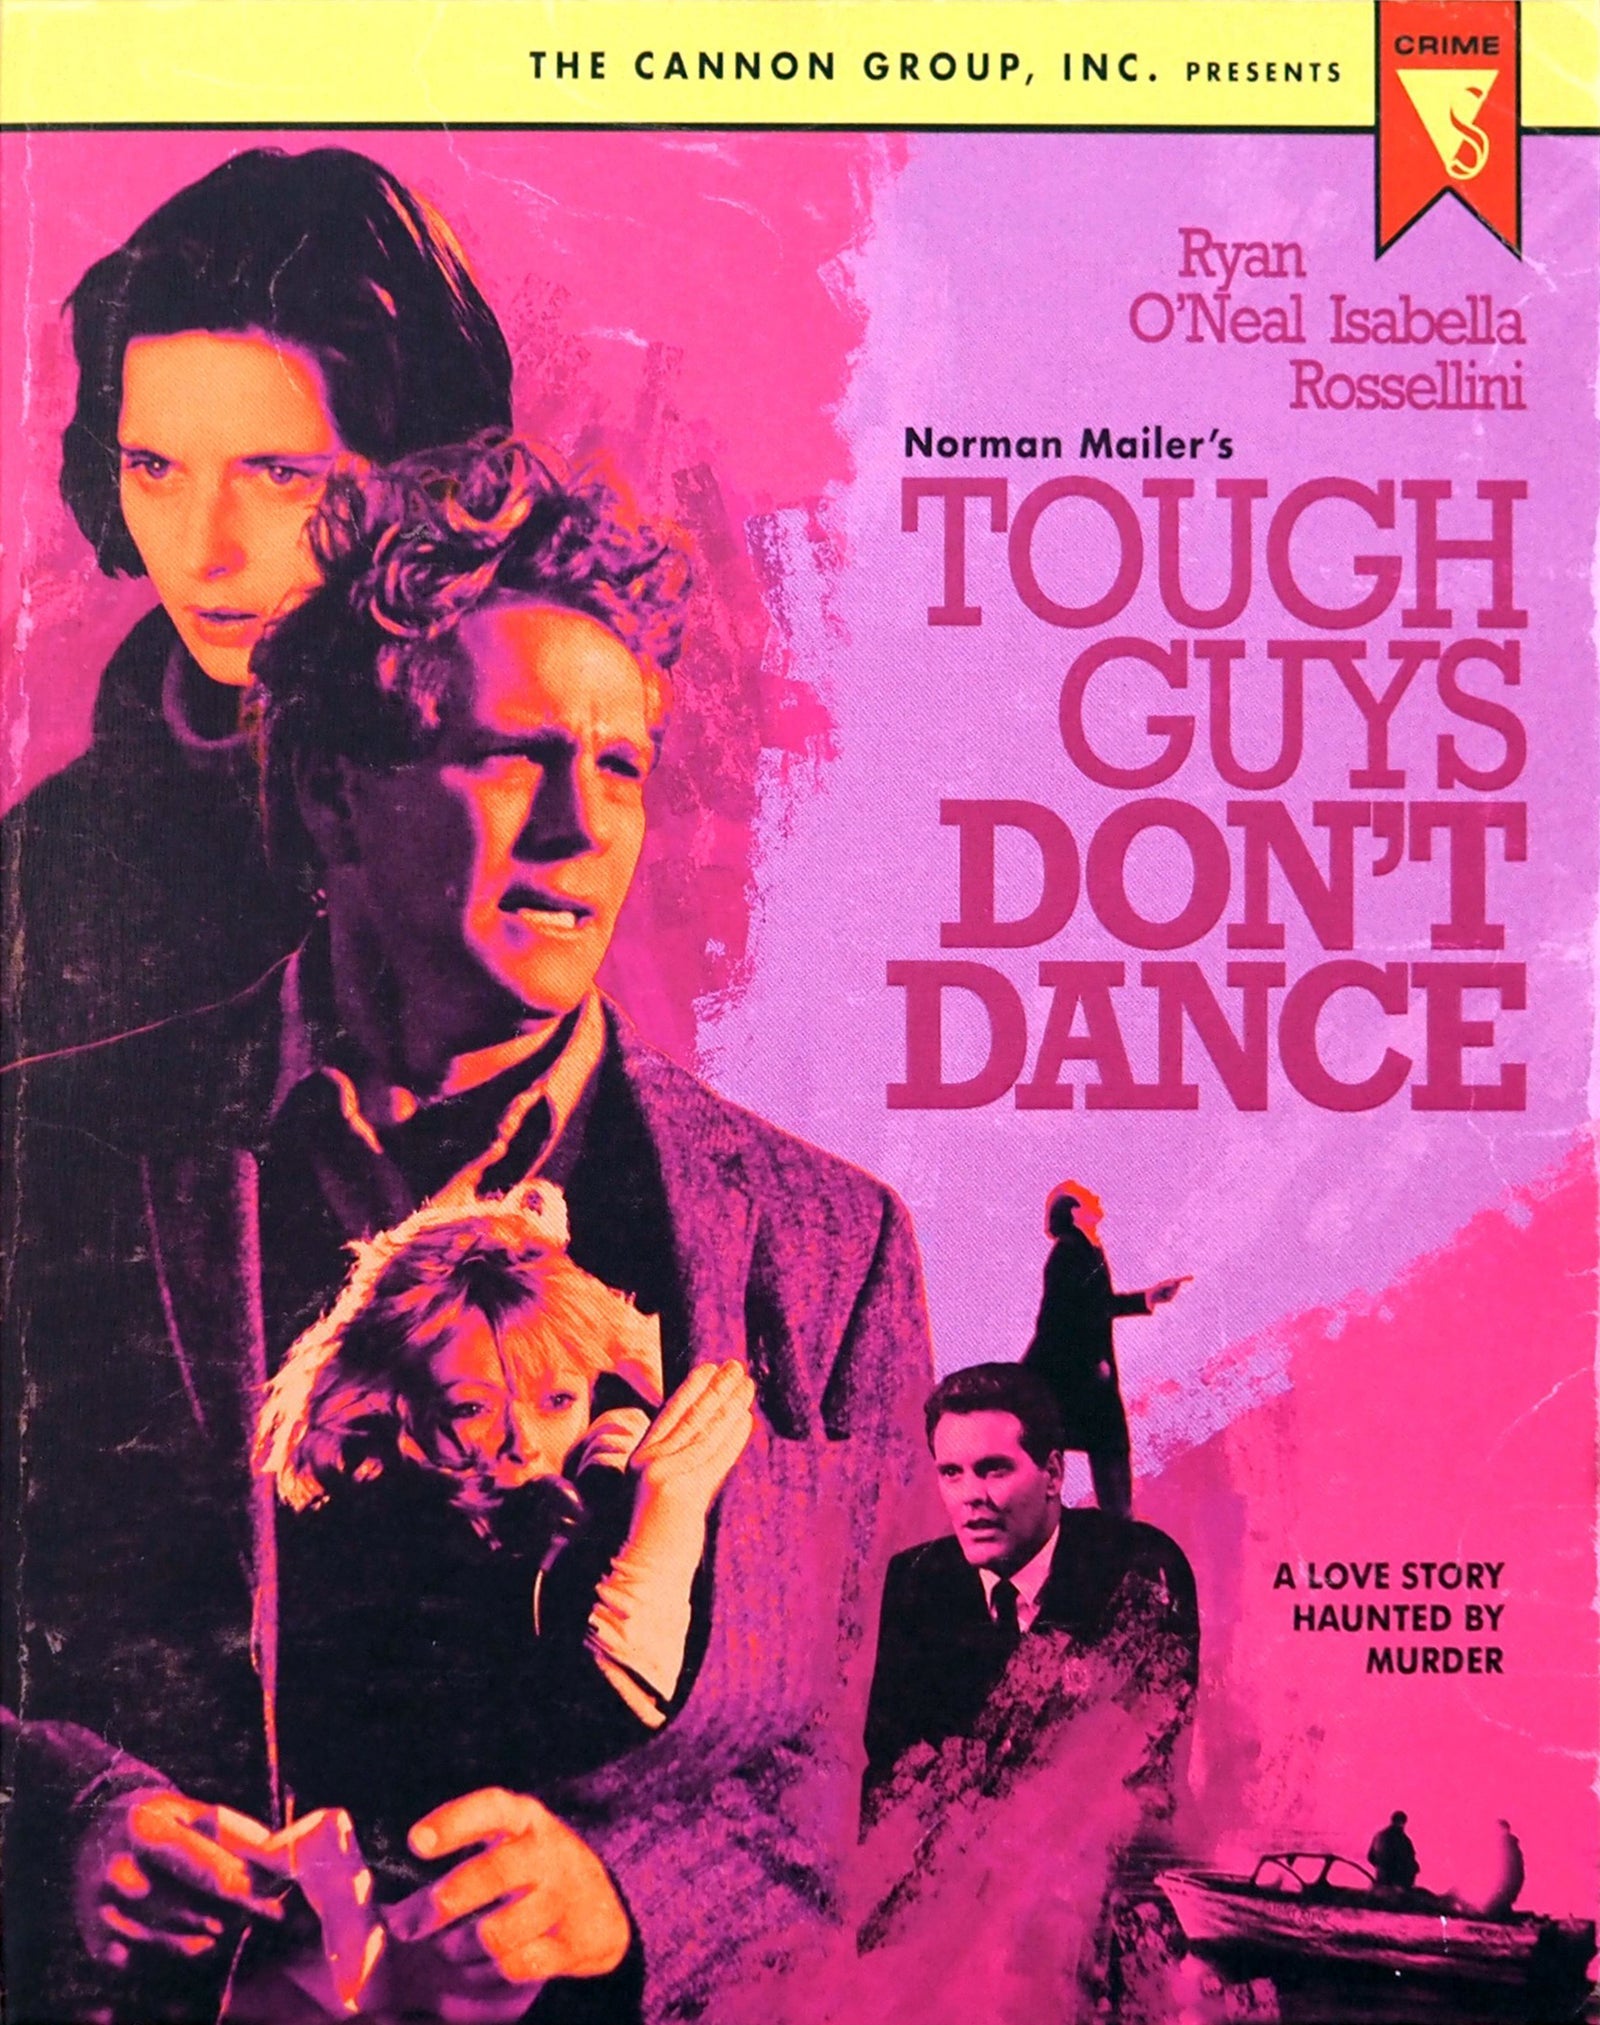 Tough Guys Dont Dance (Limited Edition) Blu-Ray Blu-Ray